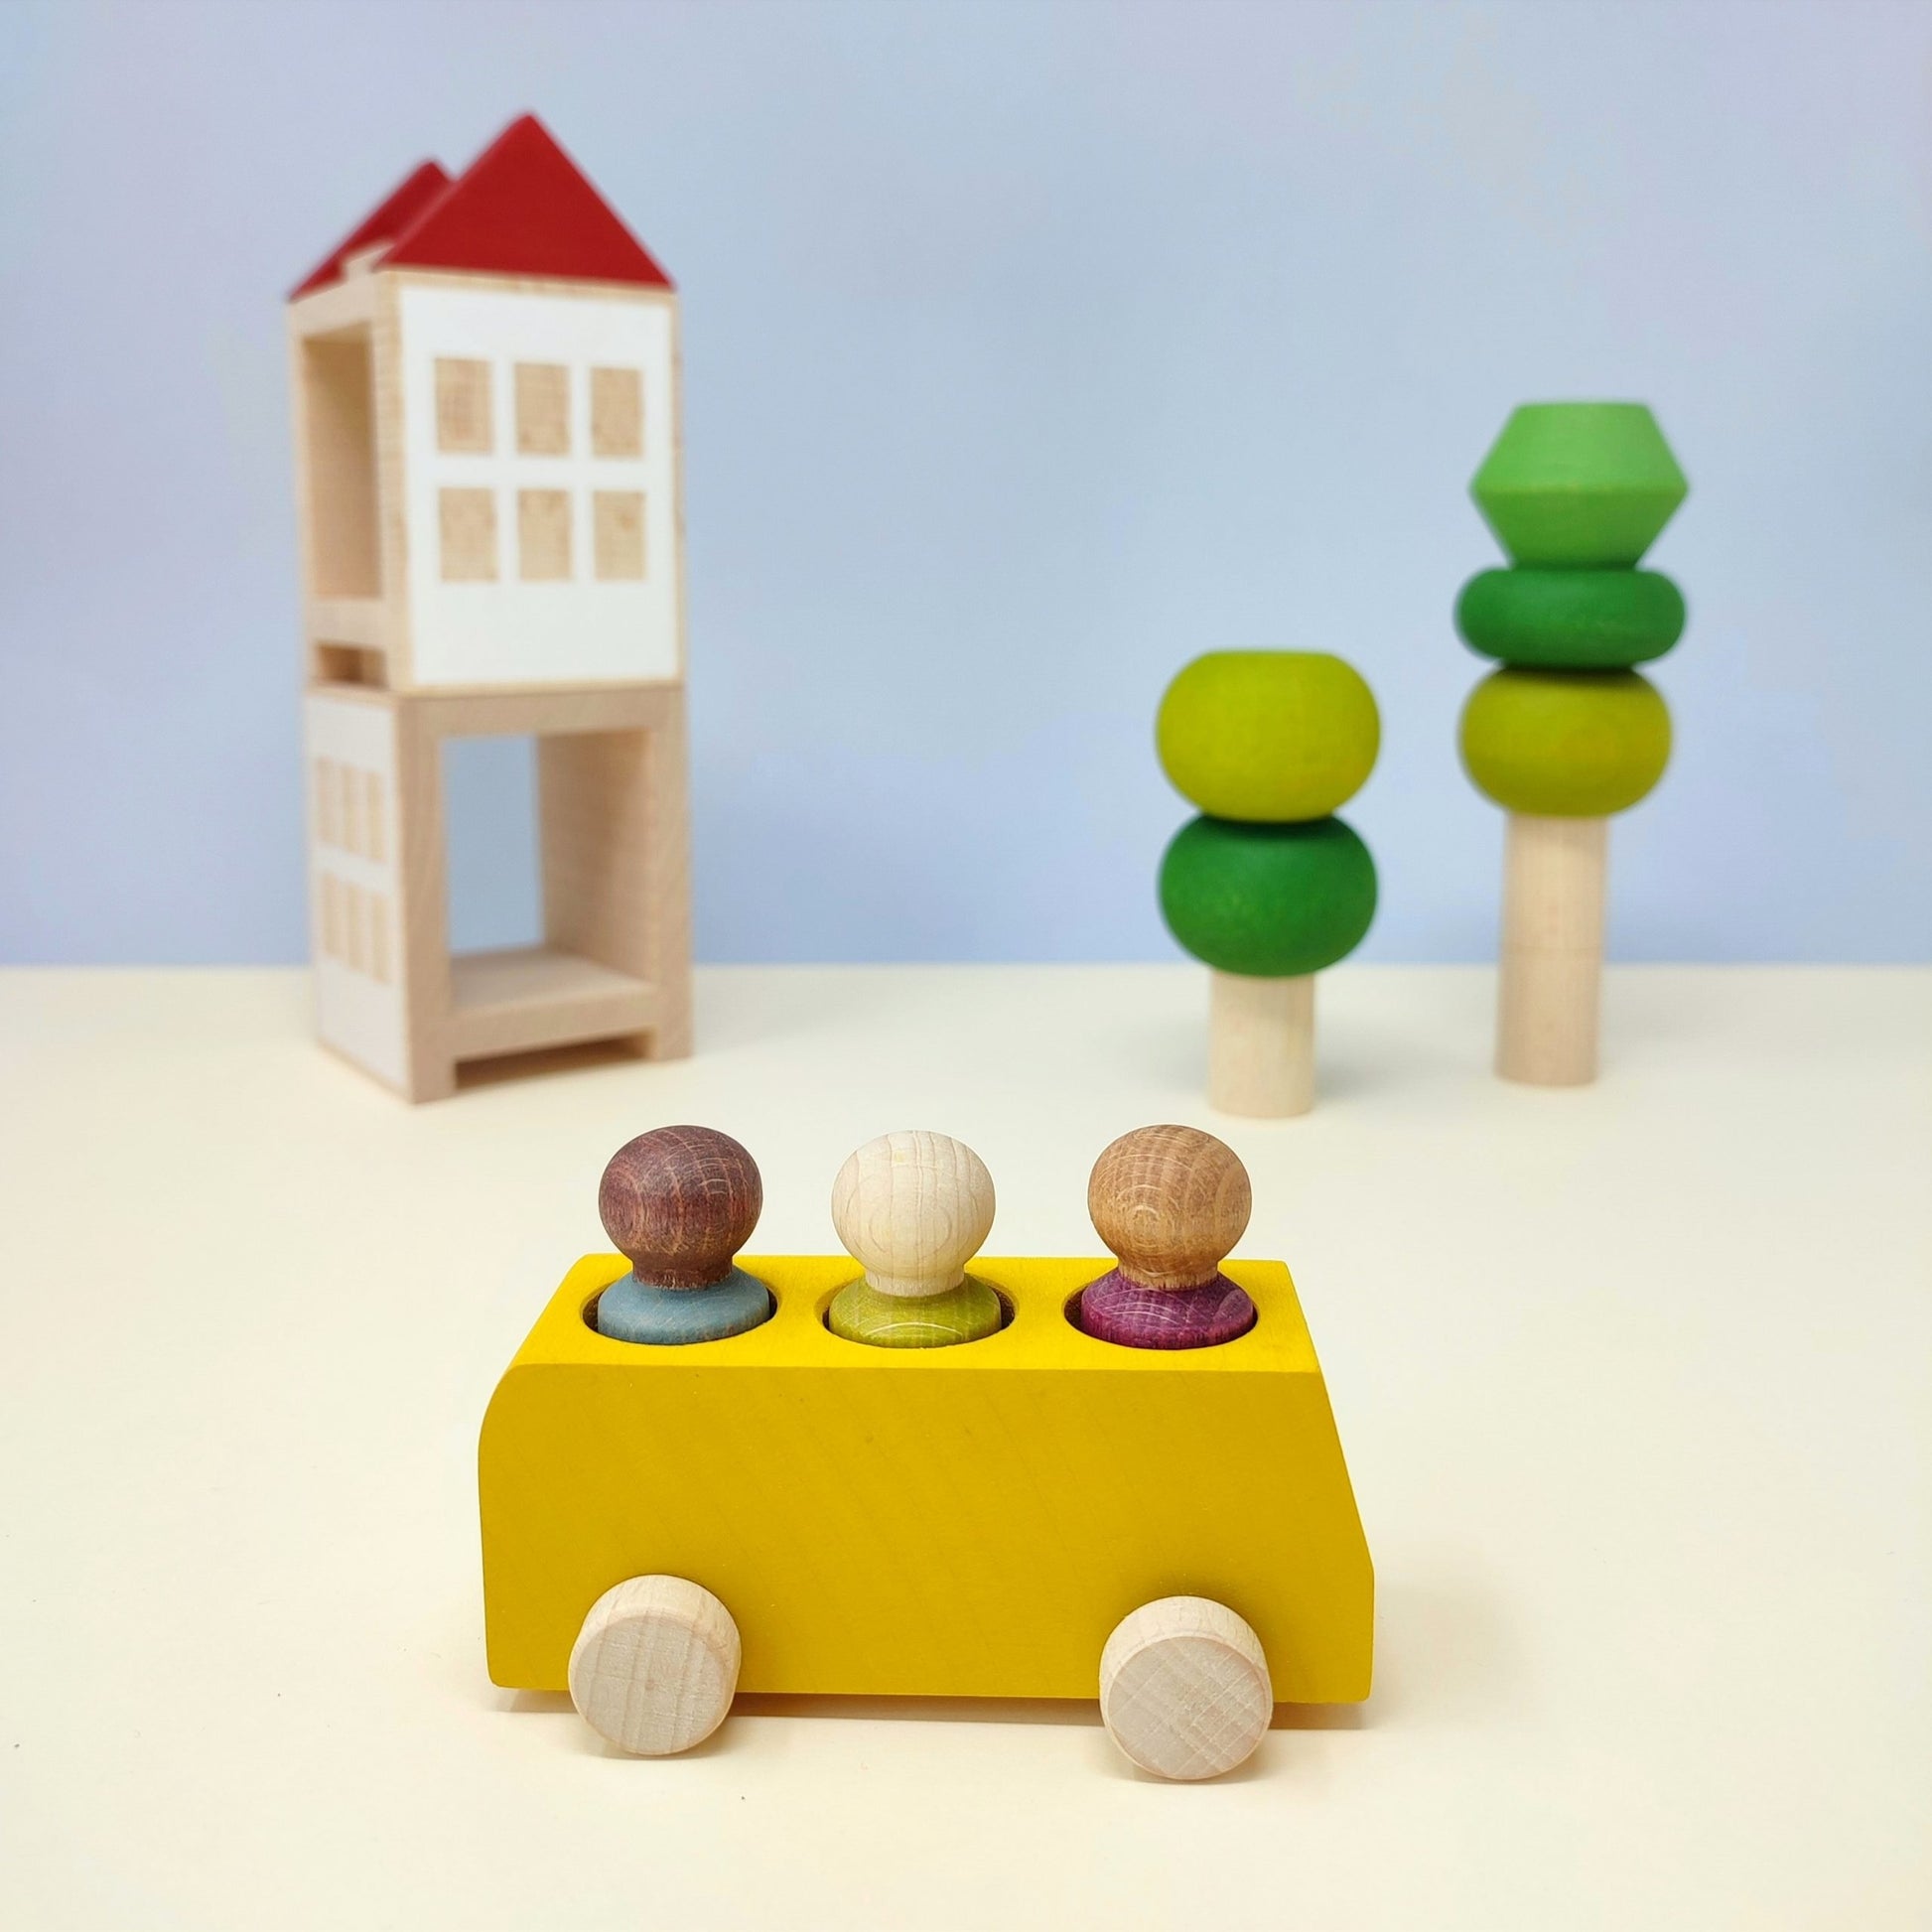 Lubulona - Modern Wooden Toys from Spain – Wood Wood Toys